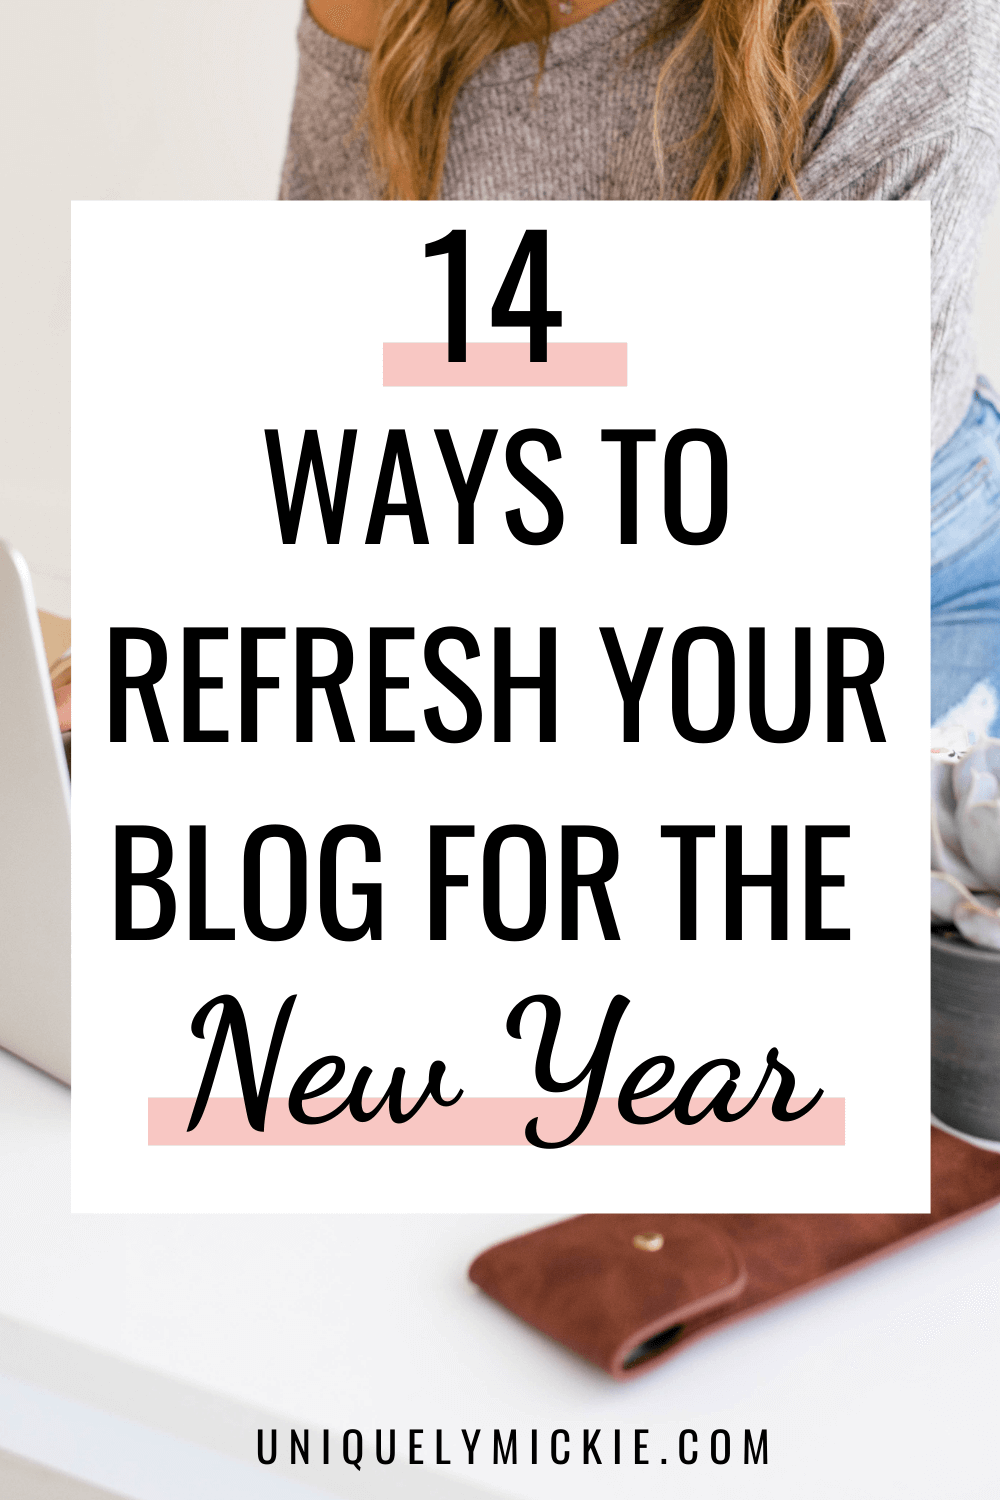 It’s the holiday season, which in blog terms means the end of a business quarter. Before entering into a new year, I like to do a deep blog refresh. In this blog post, I share 14 things that you can do to refresh your blog for the new year! 